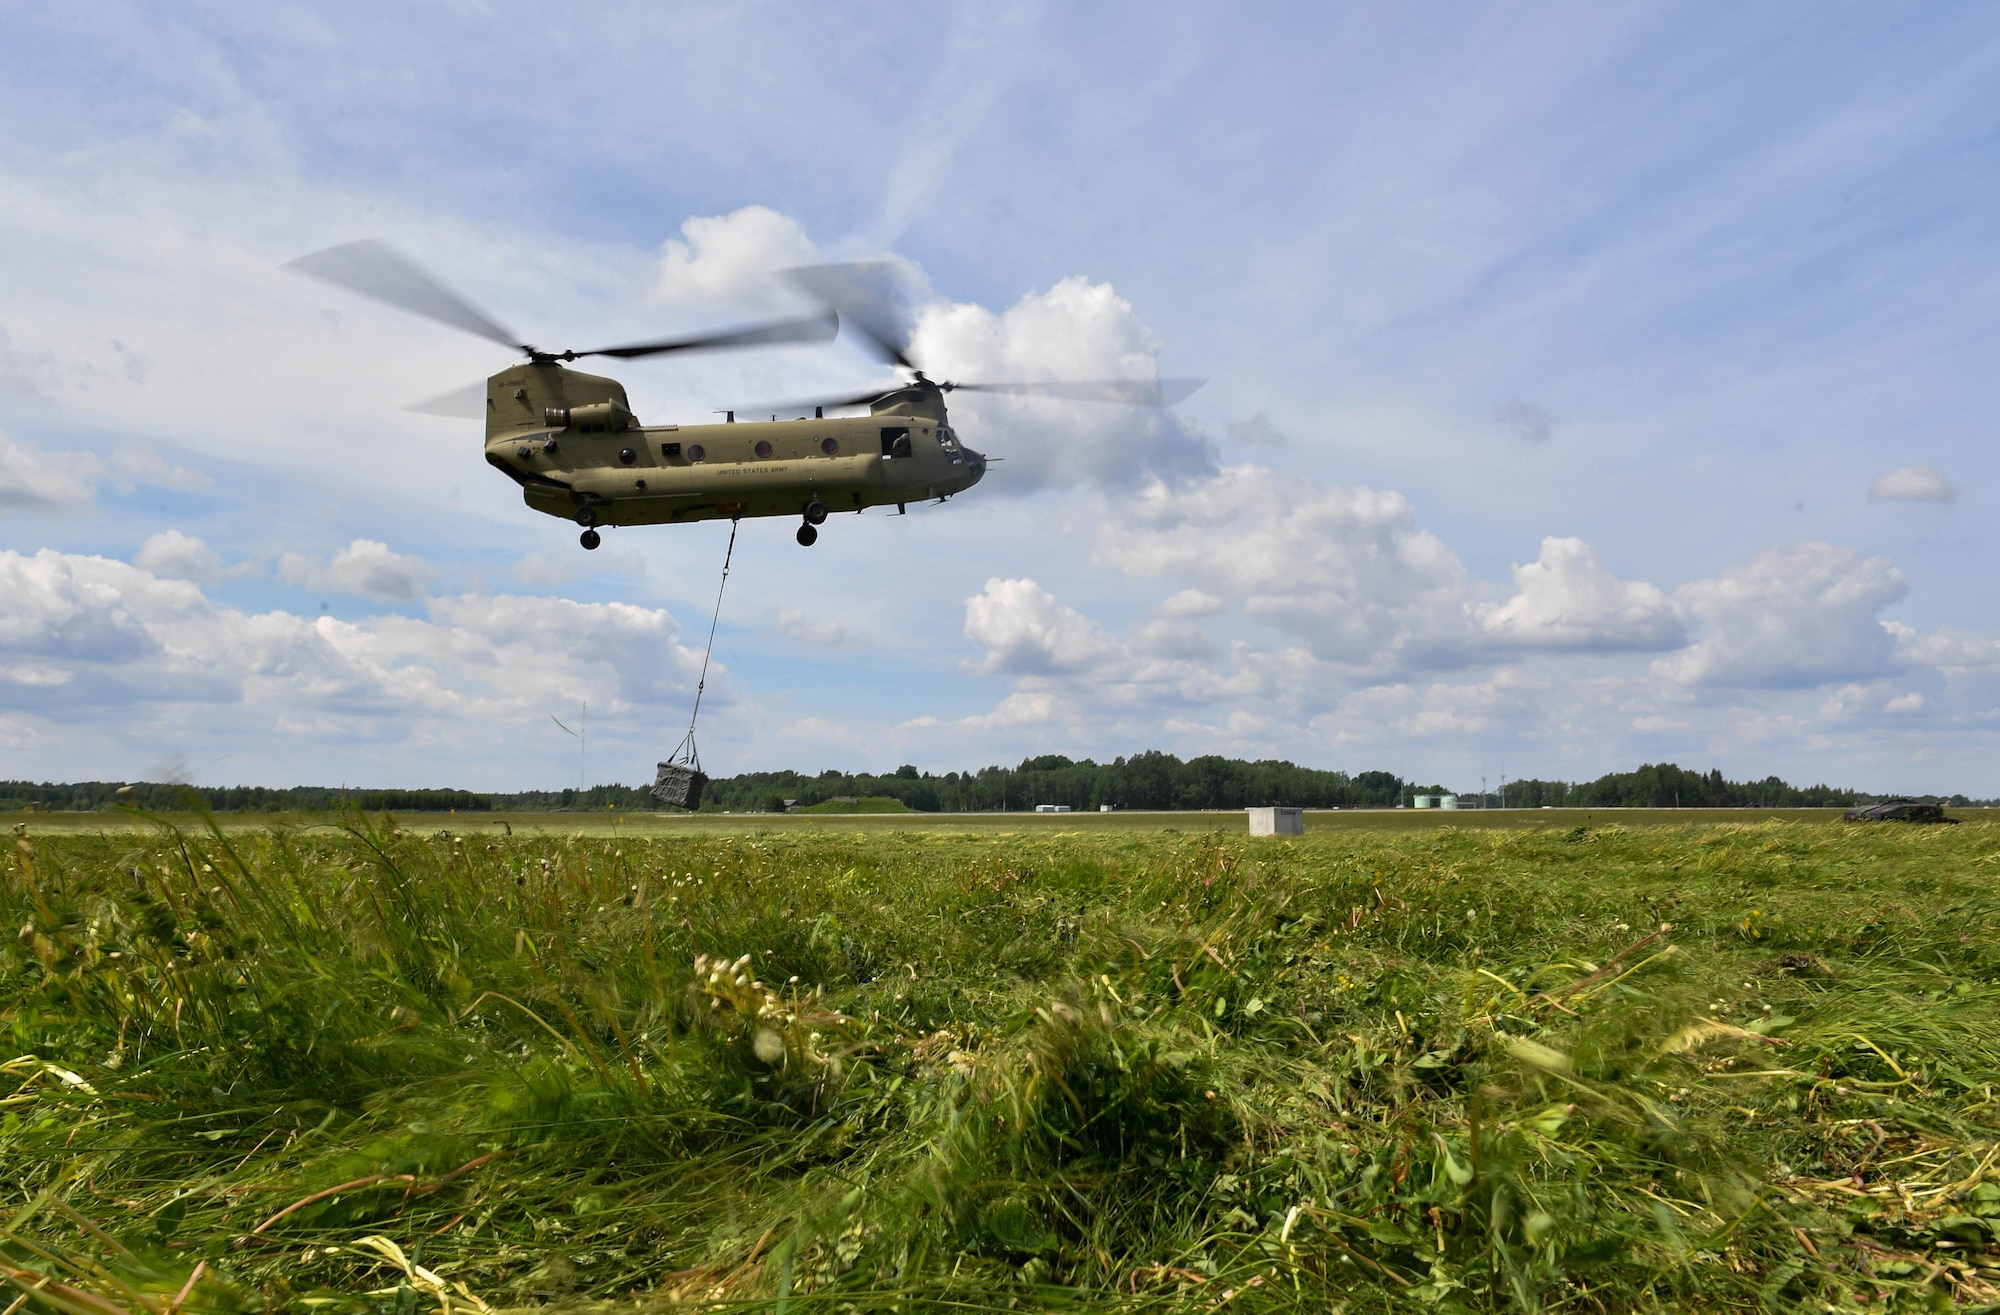 A U.S. Army CH-47 Chinook helicopter lifts a bundle into the air for the U.S. Air Force 435th Contingency Response Group’s sling load operation during exercise Saber Strike 17 at Lielvarde Air Base, Latvia, June 10, 2017. The 435th CRG Airmen worked alongside the U.S. Army and NATO military members throughout the exercise. Saber Strike 17 continues to increase participating nations’ capacity to conduct a full spectrum of military operations.  (U.S Air Force photo by Senior Airman Tryphena Mayhugh)